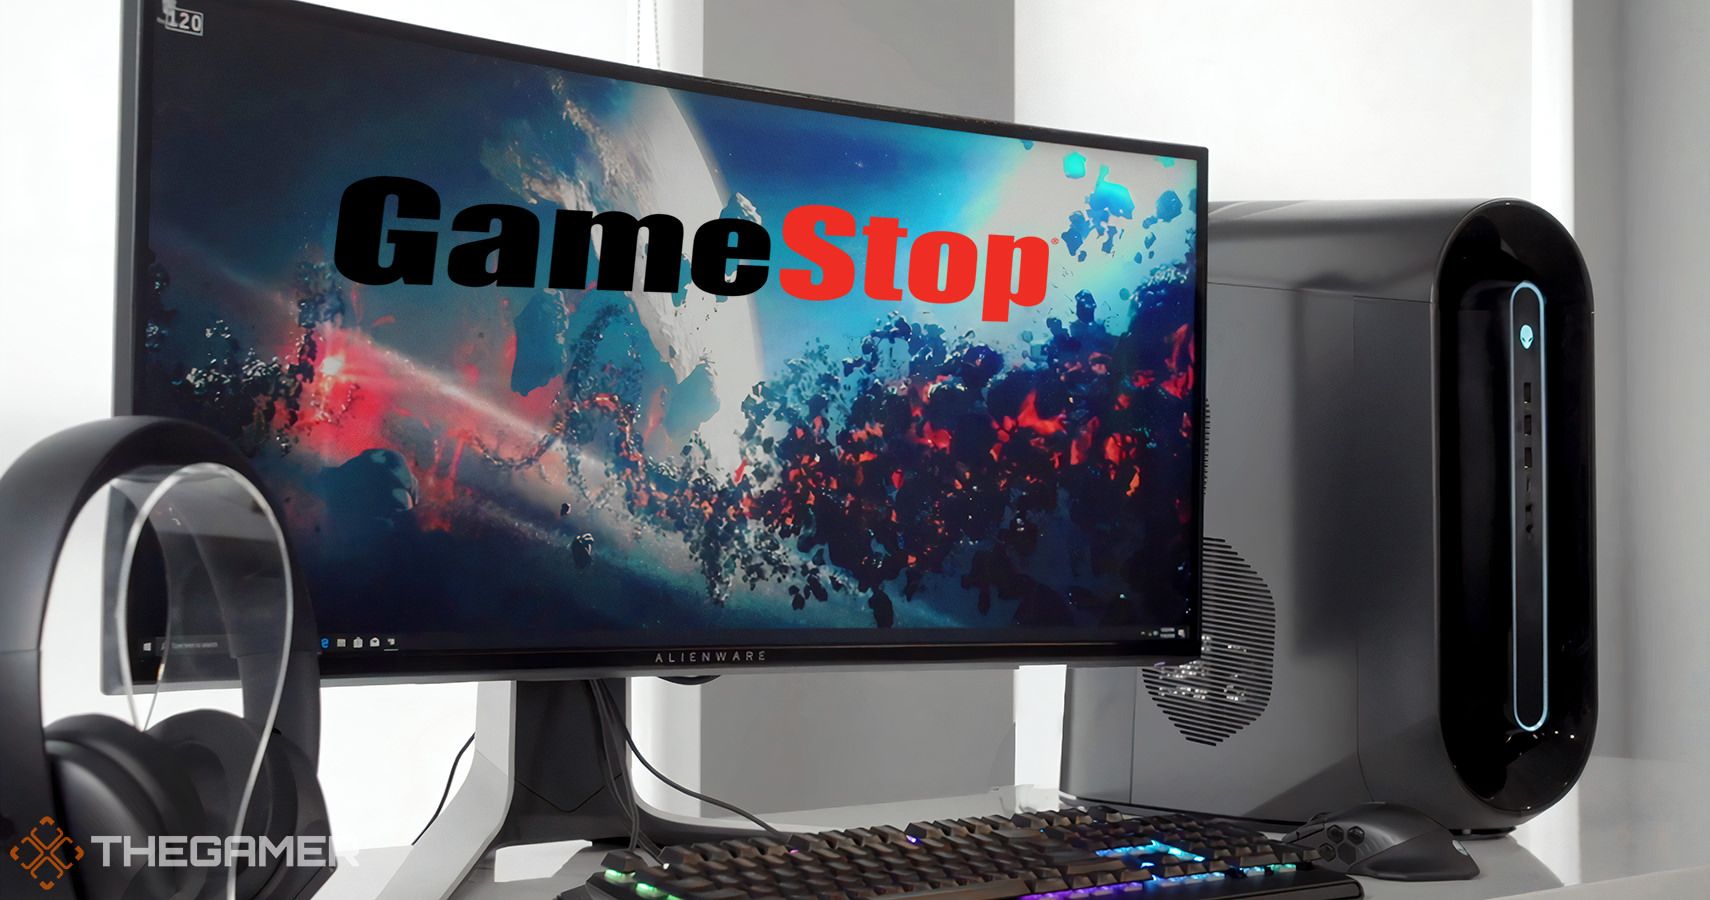 GameStop Wants To Get Into PC Gaming In Expanded Digital Shift